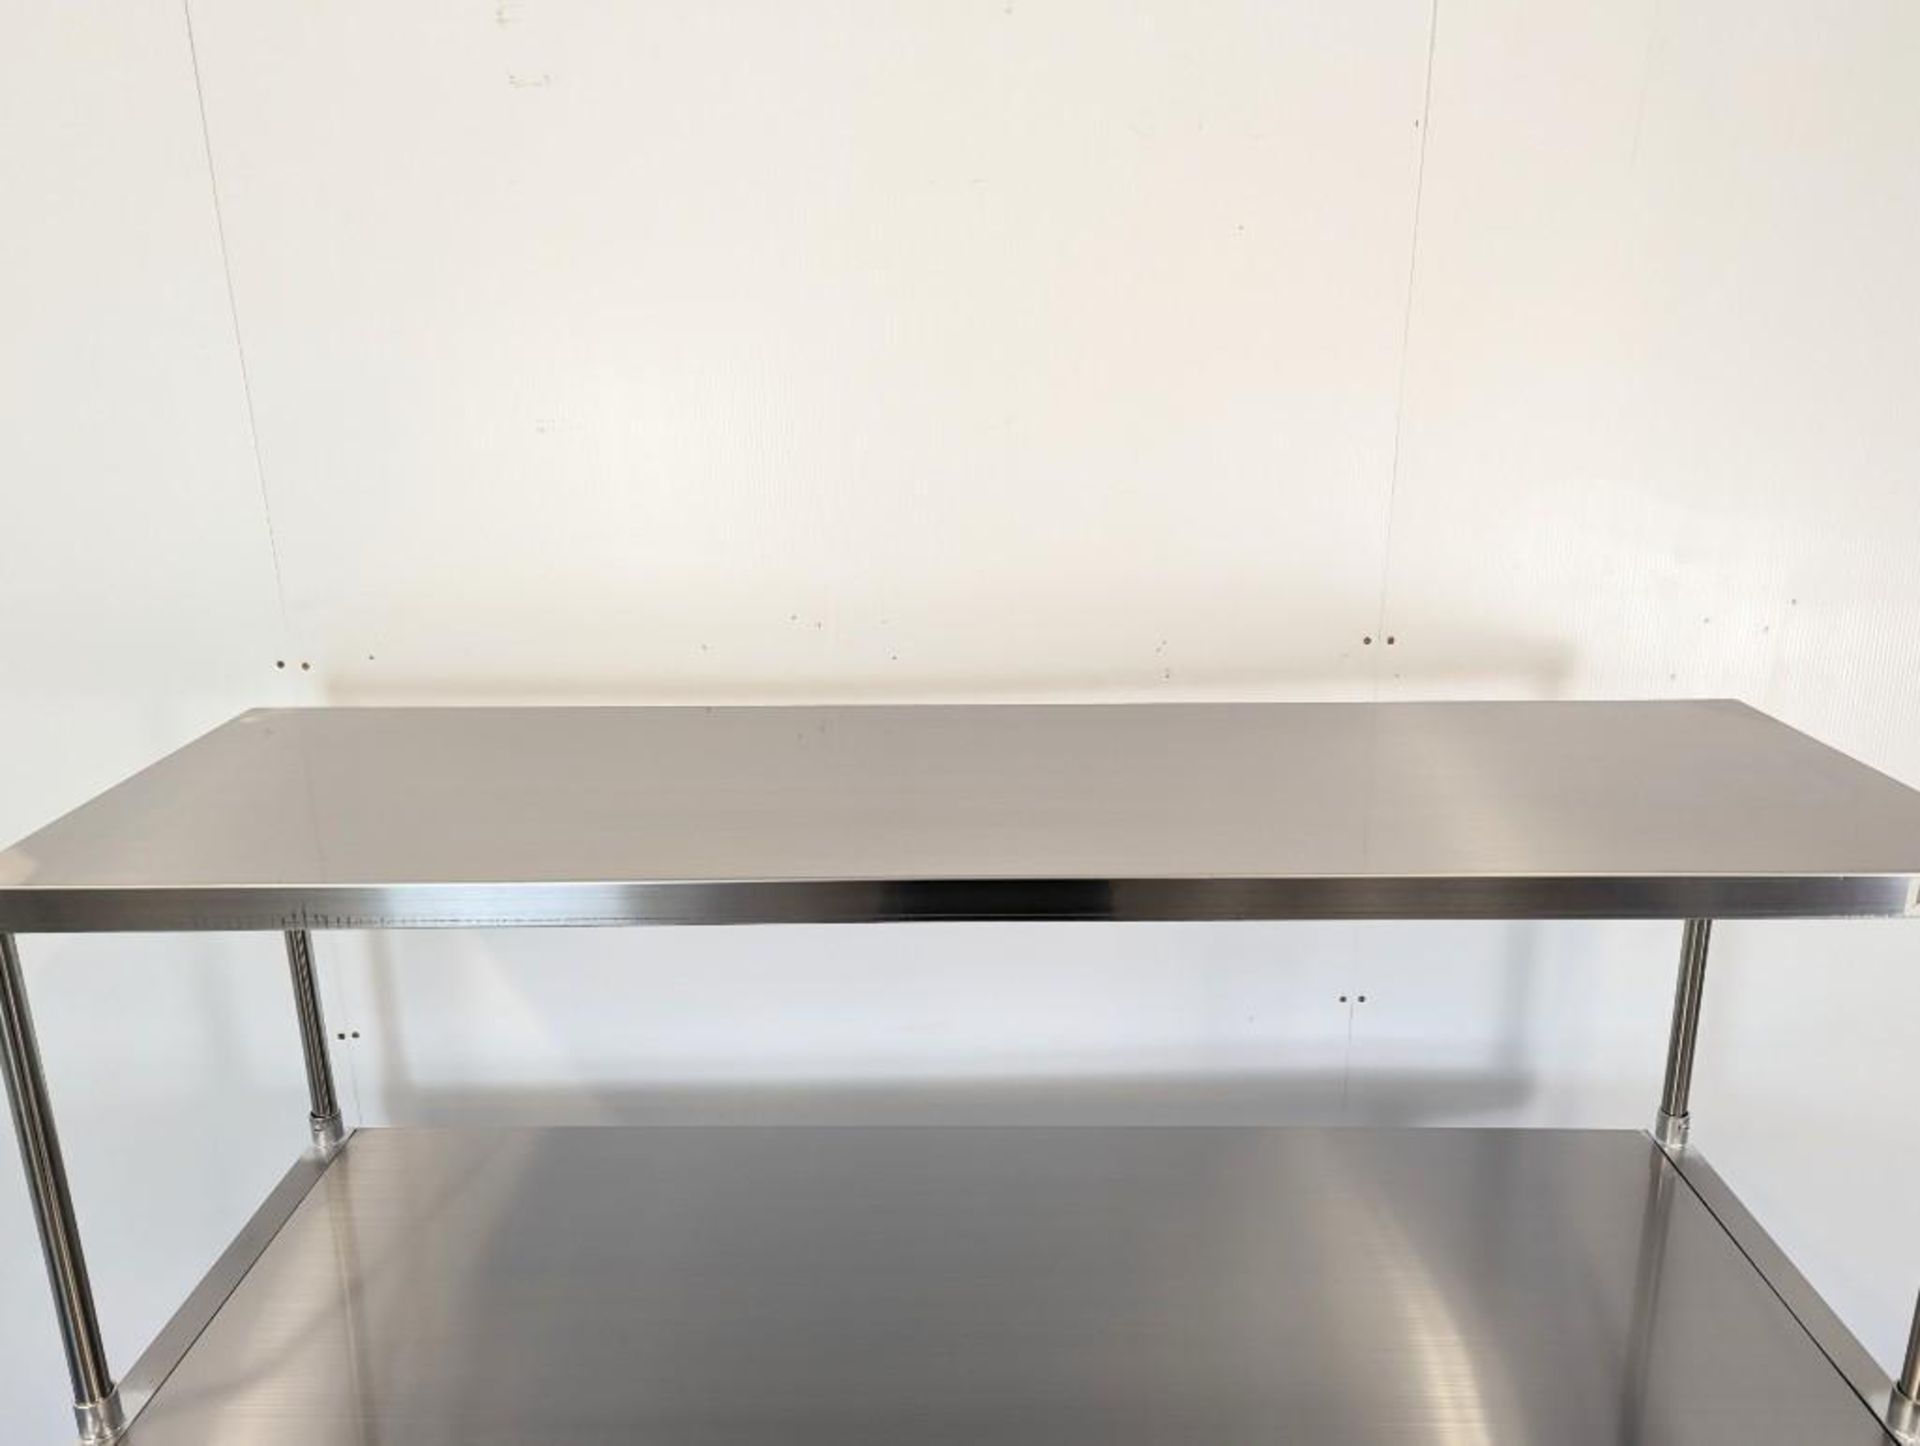 NEW 30" X 60" STAINLESS WORK TABLE WITH 18" SINGLE OVERSHELF - Image 6 of 8